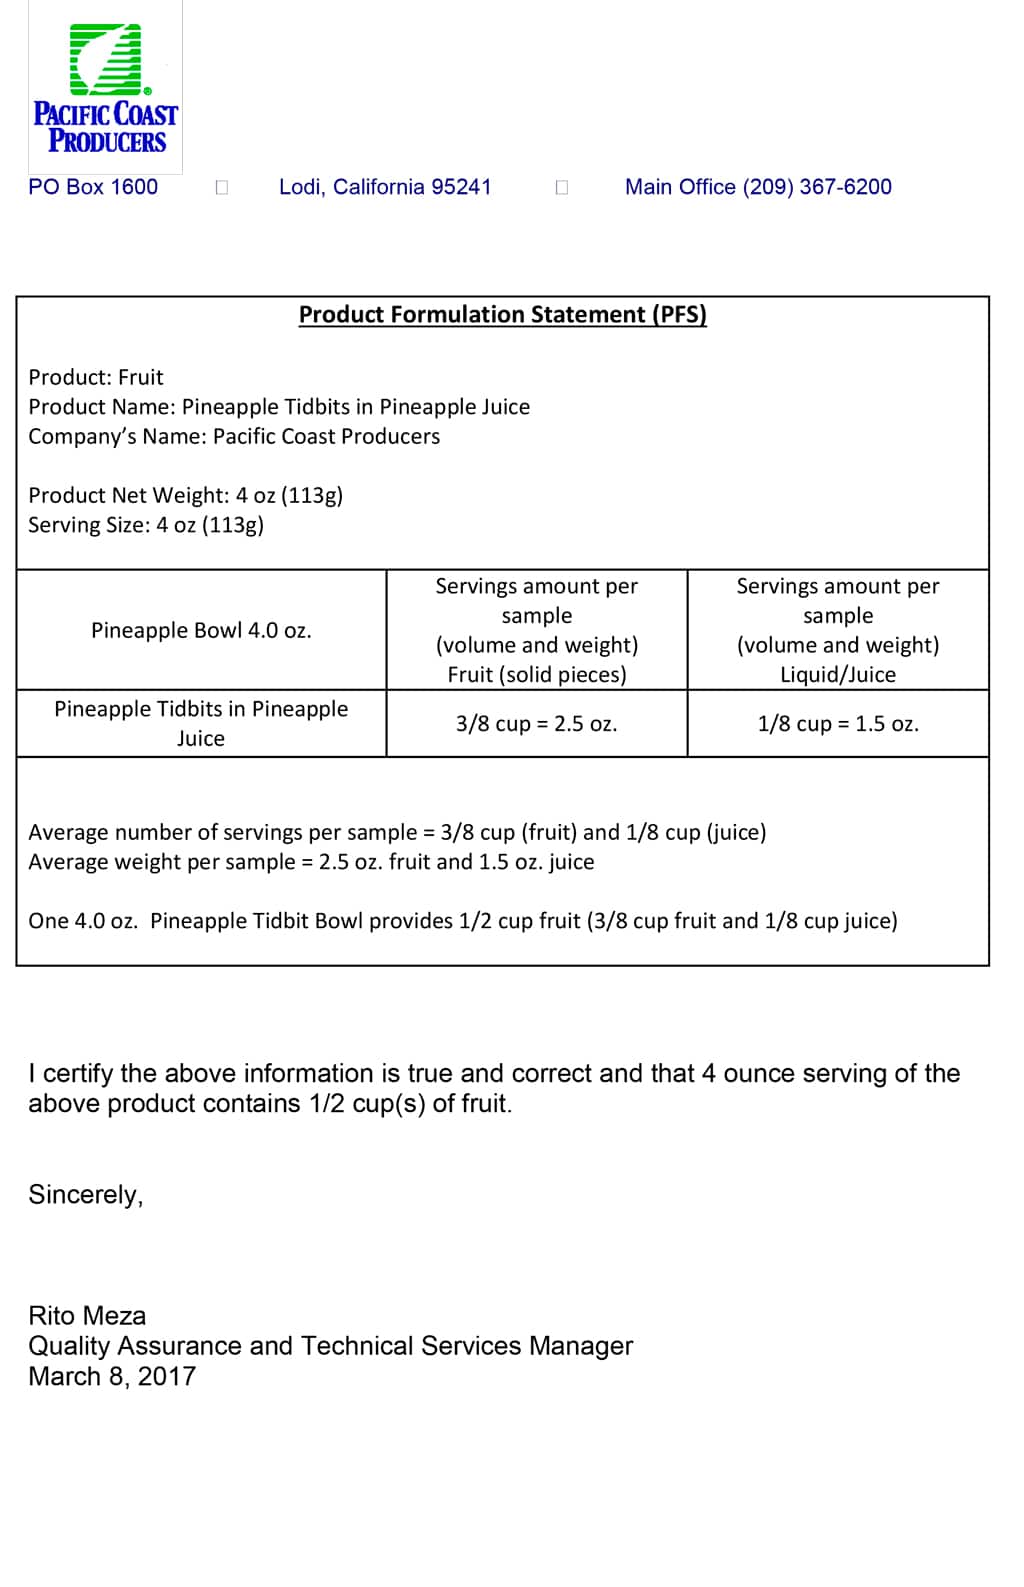 A sample form for a foundation statement with an added Broker's Section.